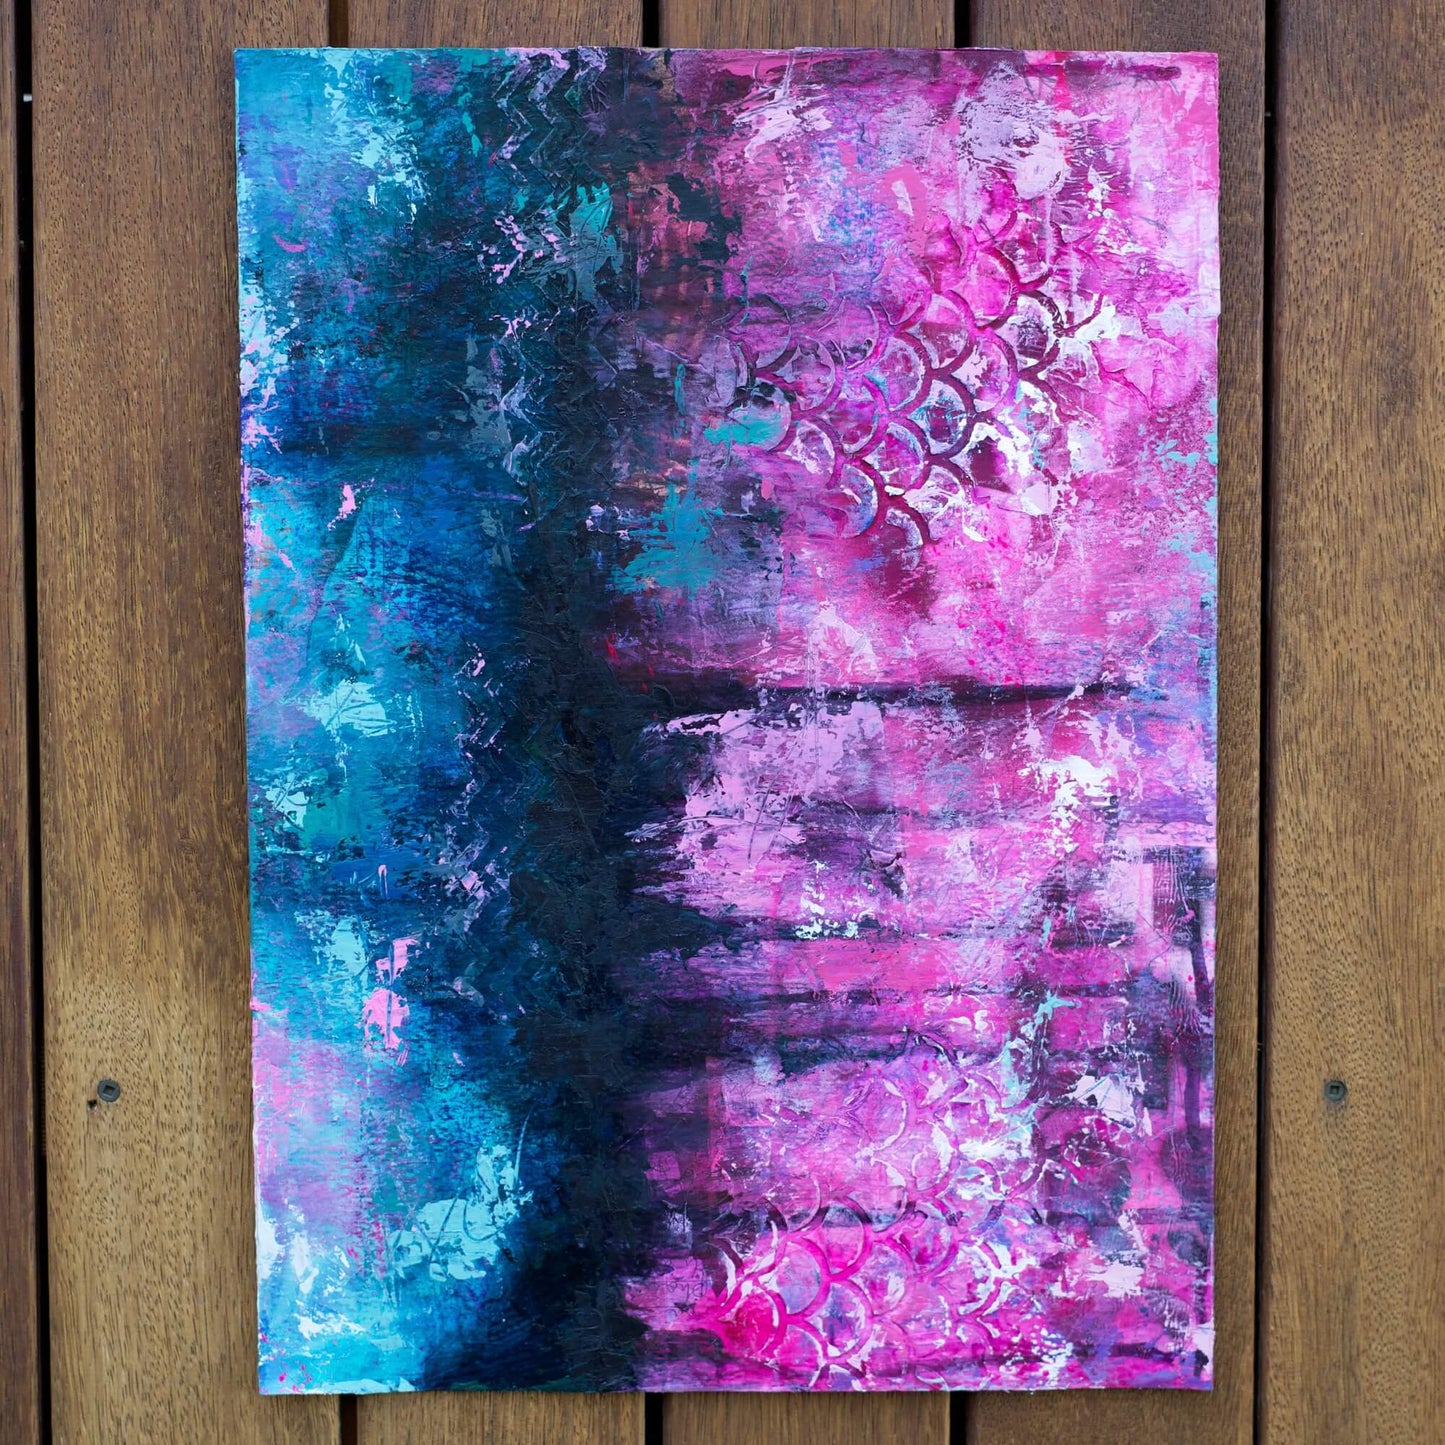 abstract painting for sale melbourne, magenta, blue black, dark abstract painting